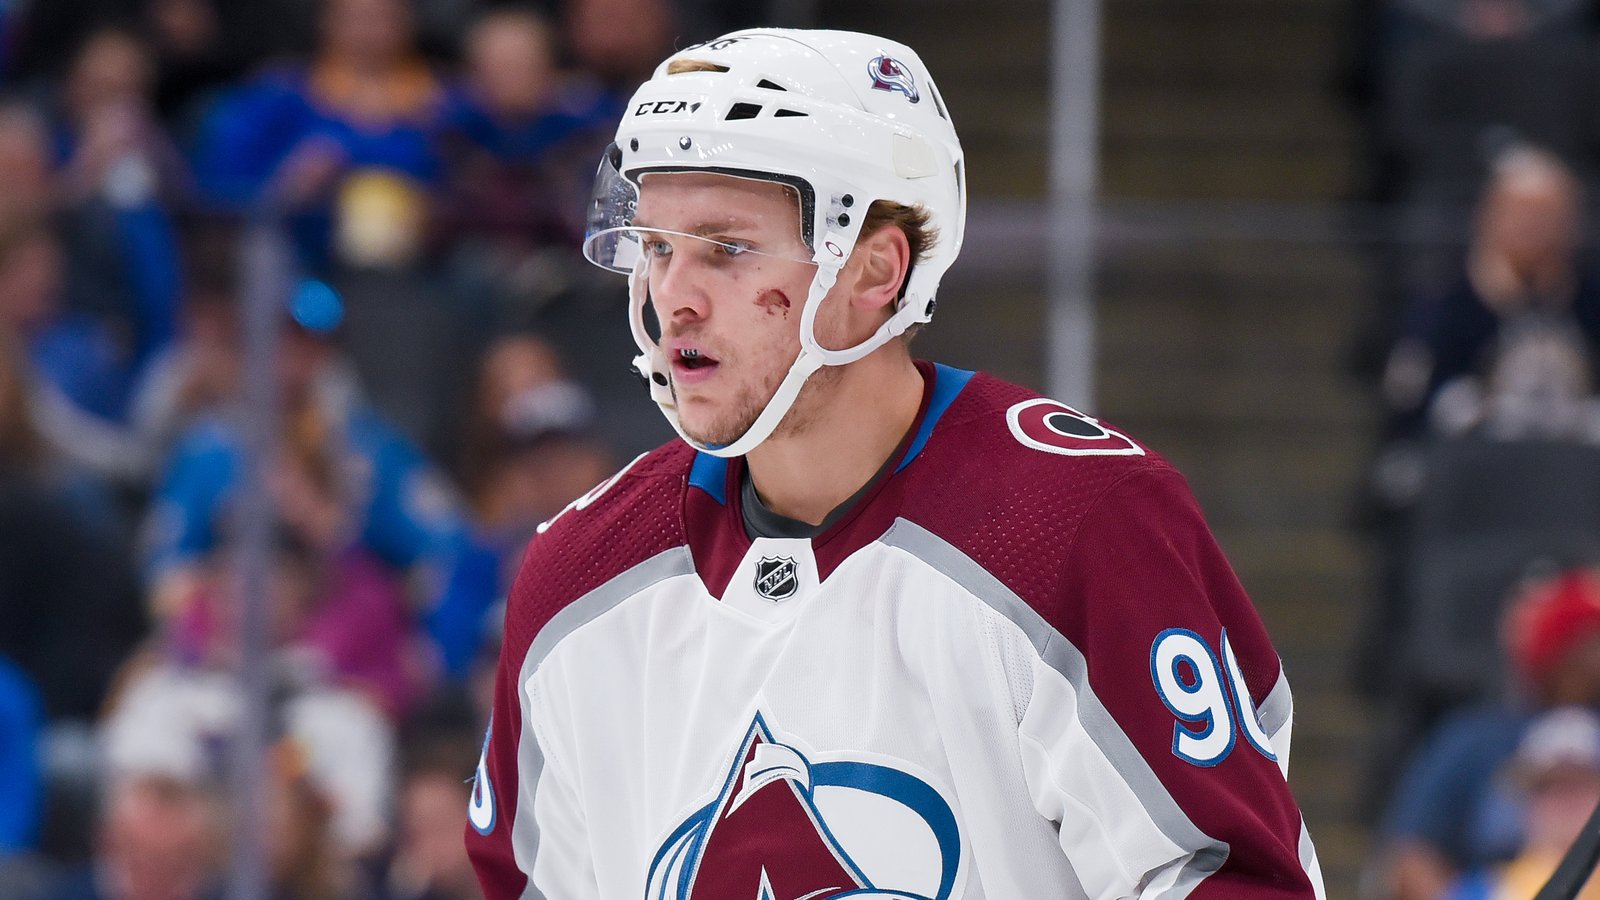 Avs look to stay hot without Rantanen